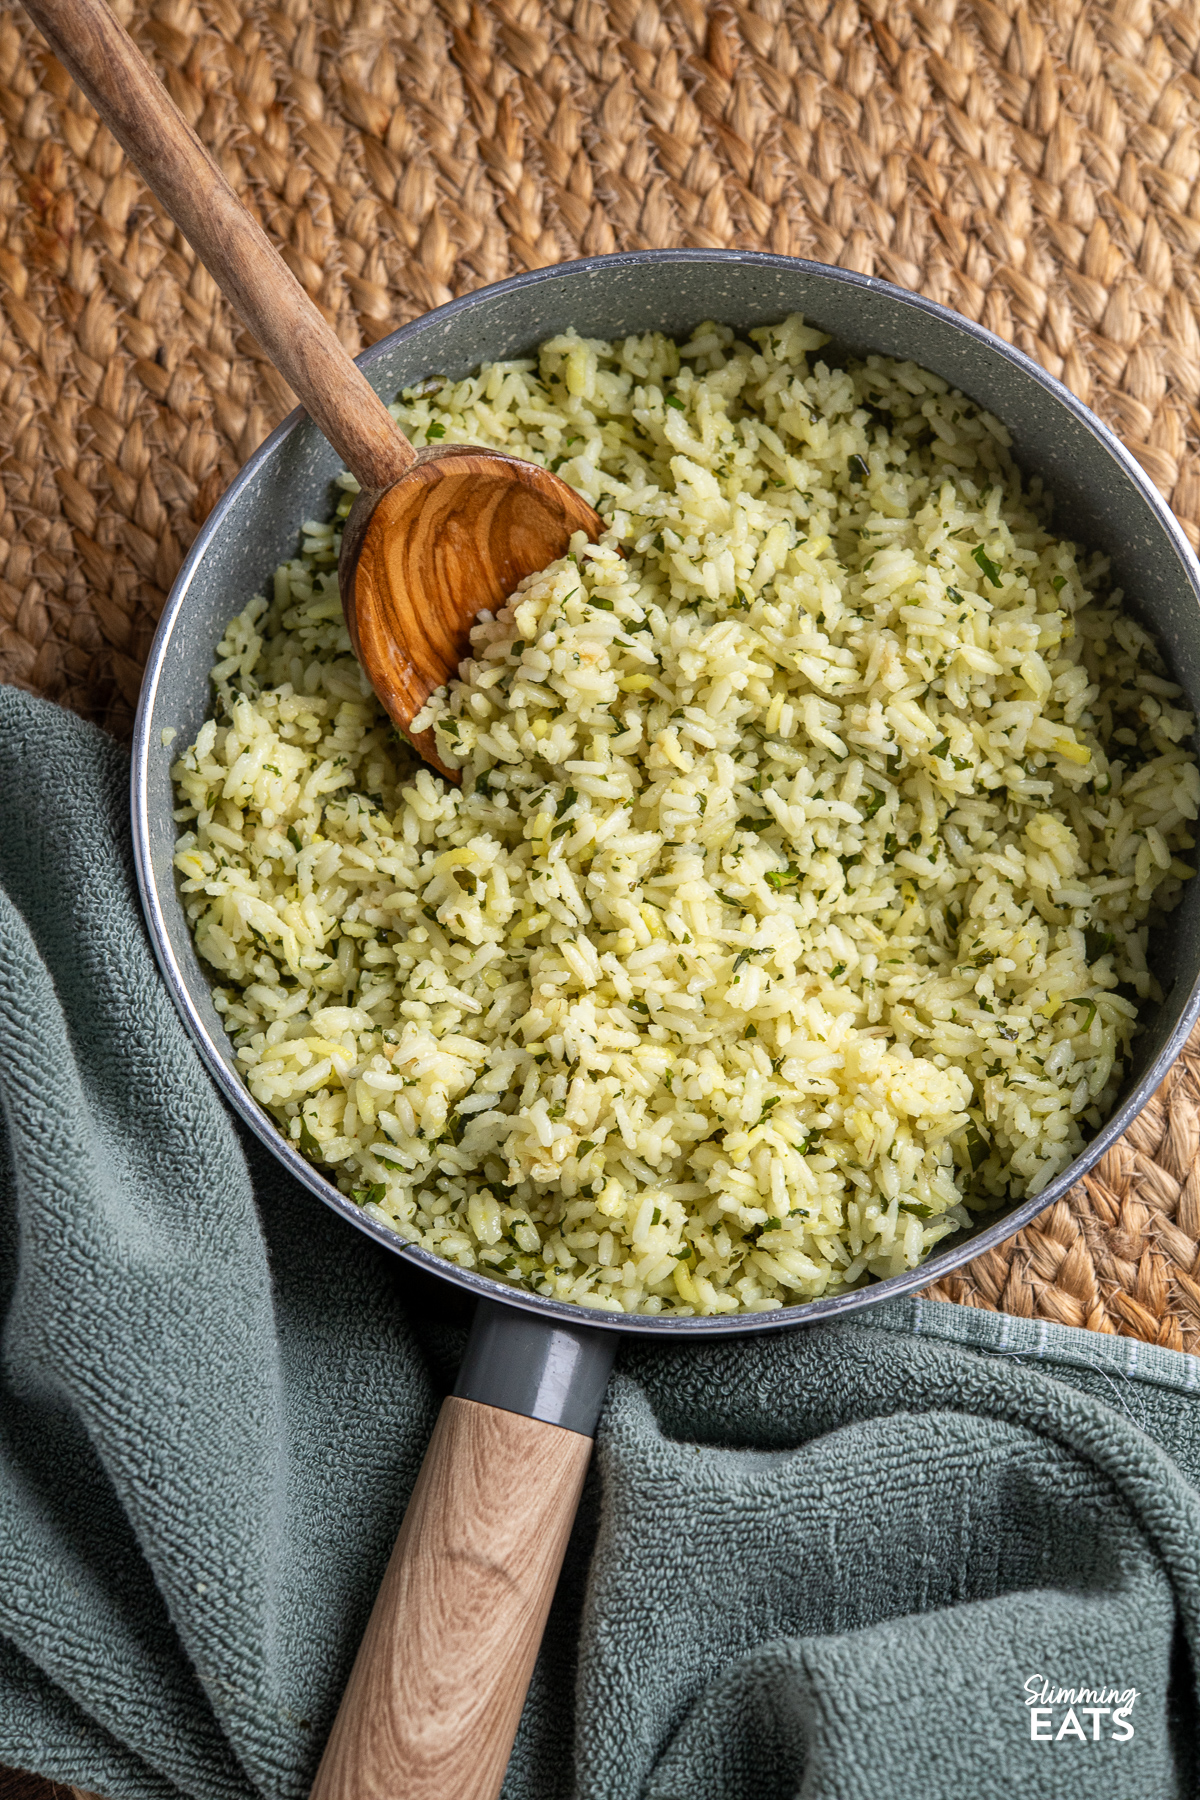 Cooked herby garlic rice in a wooden handled saucepan with olive wood spoon placed in rice.